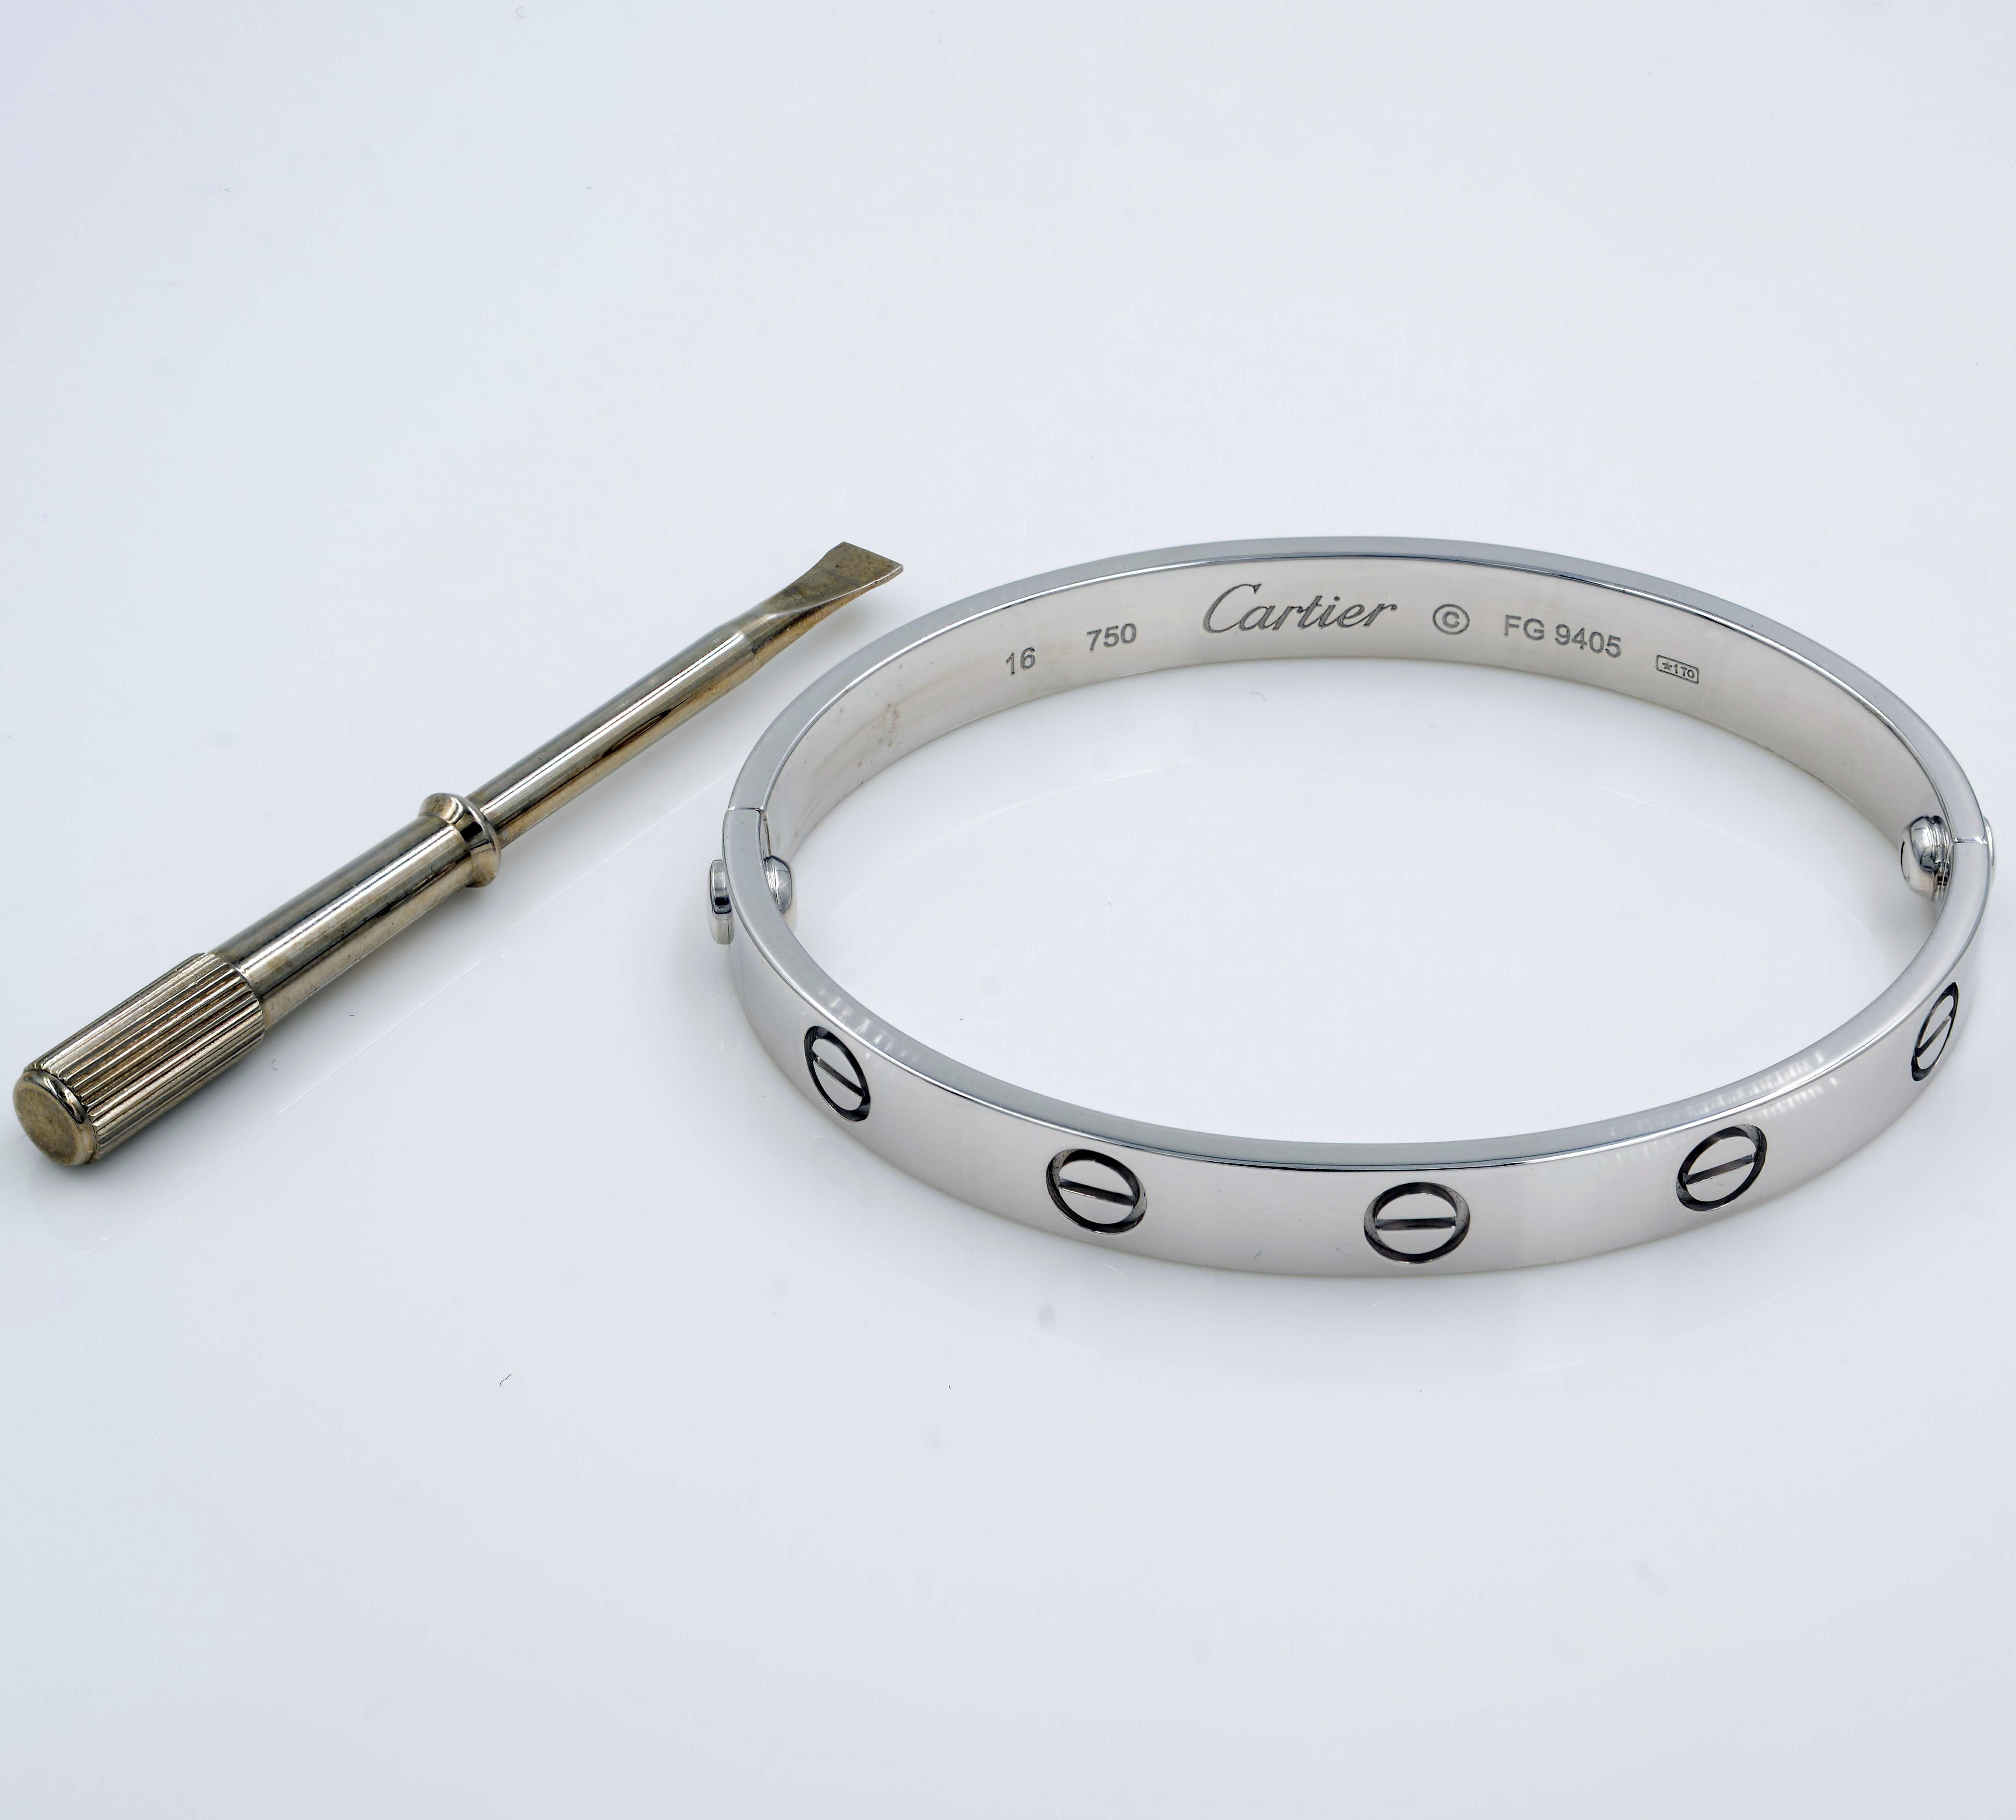 Cartier Love Bracelet Size 16 Old Style 18K White Gold

Details: Cartier 18K White Gold Love Bracelet with Screwdriver SZ 16
Other Details:
Like New Cartier 18K white gold Love Bracelet 16 size.
Recently serviced.

Company - Cartier
Style - Love